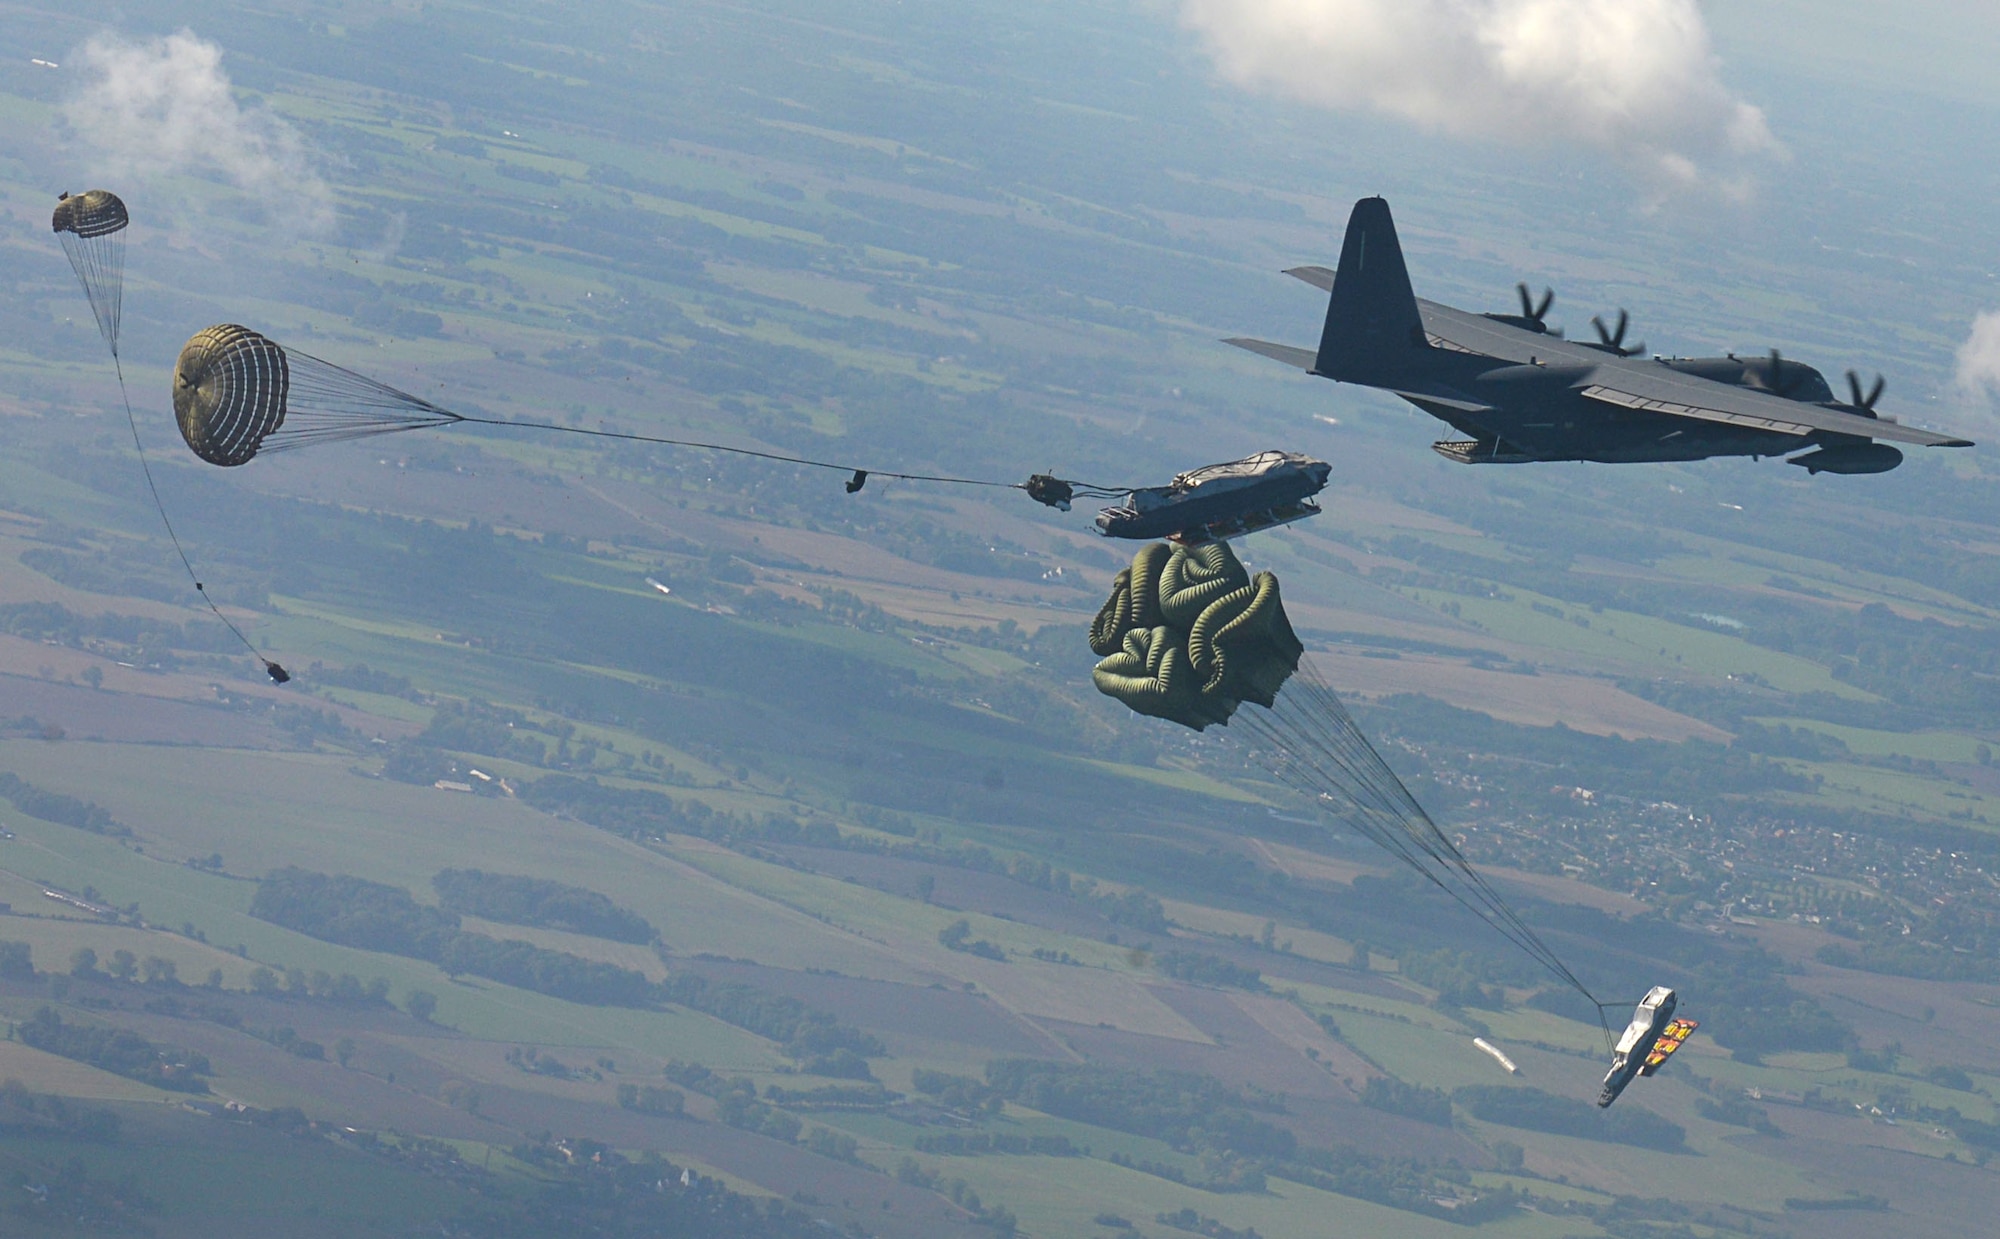 A U.S. Air Force MC-130J Commando II performs a Maritime Craft Aerial Delivery System drop over the Little Belt Strait in Denmark Sept. 27, 2016. After the Rigid inflatable Boats were deployed, U.S. Navy Special Warfare Combatant-Craft crewmen followed to set up the equipment. Finally, a third aircraft off loaded U.S. Air Force and Danish air commandos at the drop zone. (U.S. Air Force photo by Senior Airman Justine Rho)